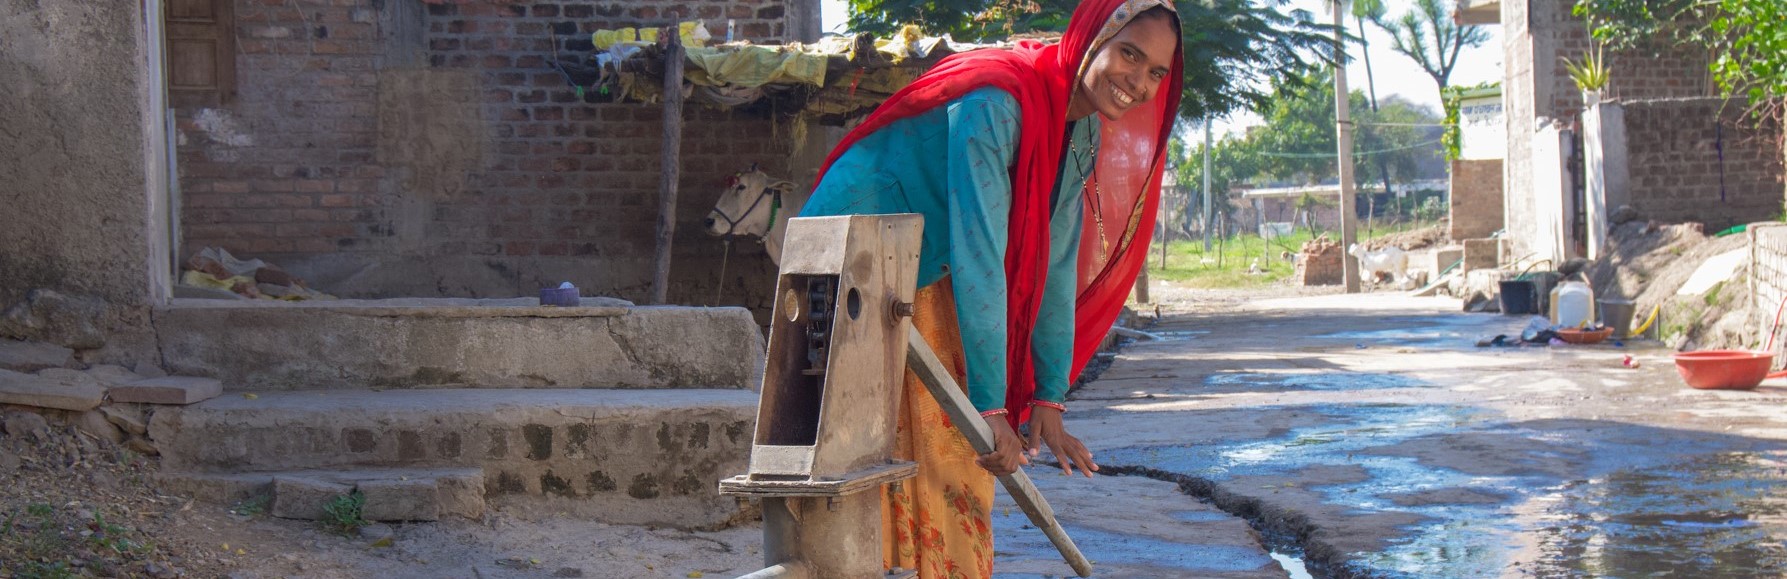 A woman in Jamgod village in Madhya Pradesh, India pumps water for her daily needs. Jamgod village is one of many where women are catalyzed to become water champions through the USAID Gap Inc. Women + Water Alliance.